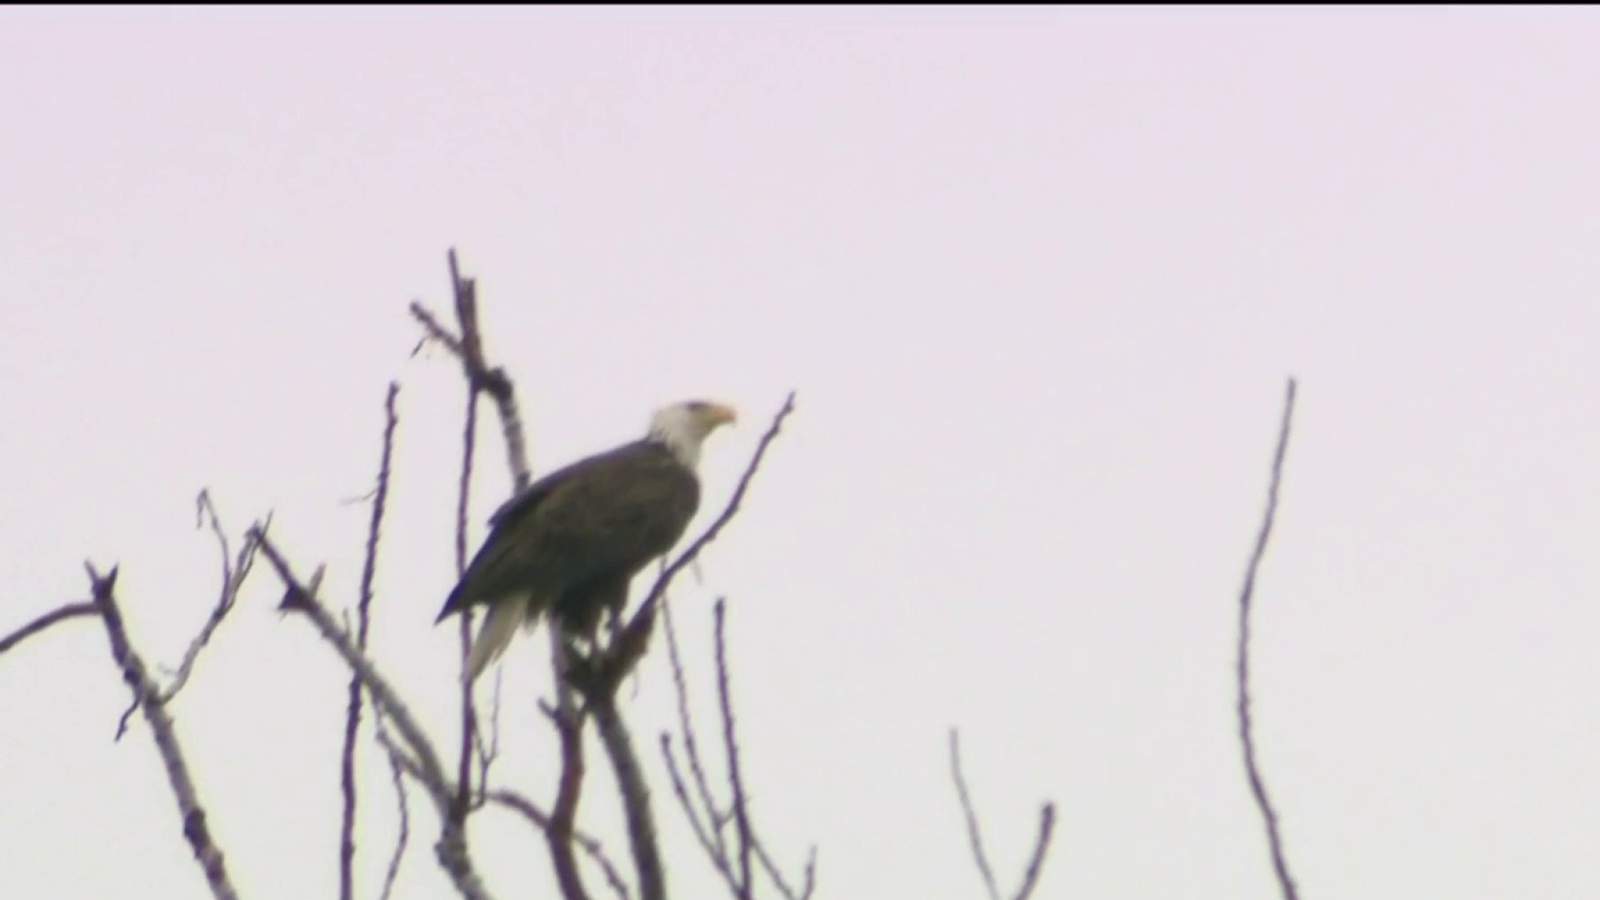 Visitors invited to see thriving home of Bald Eagles in Monroe